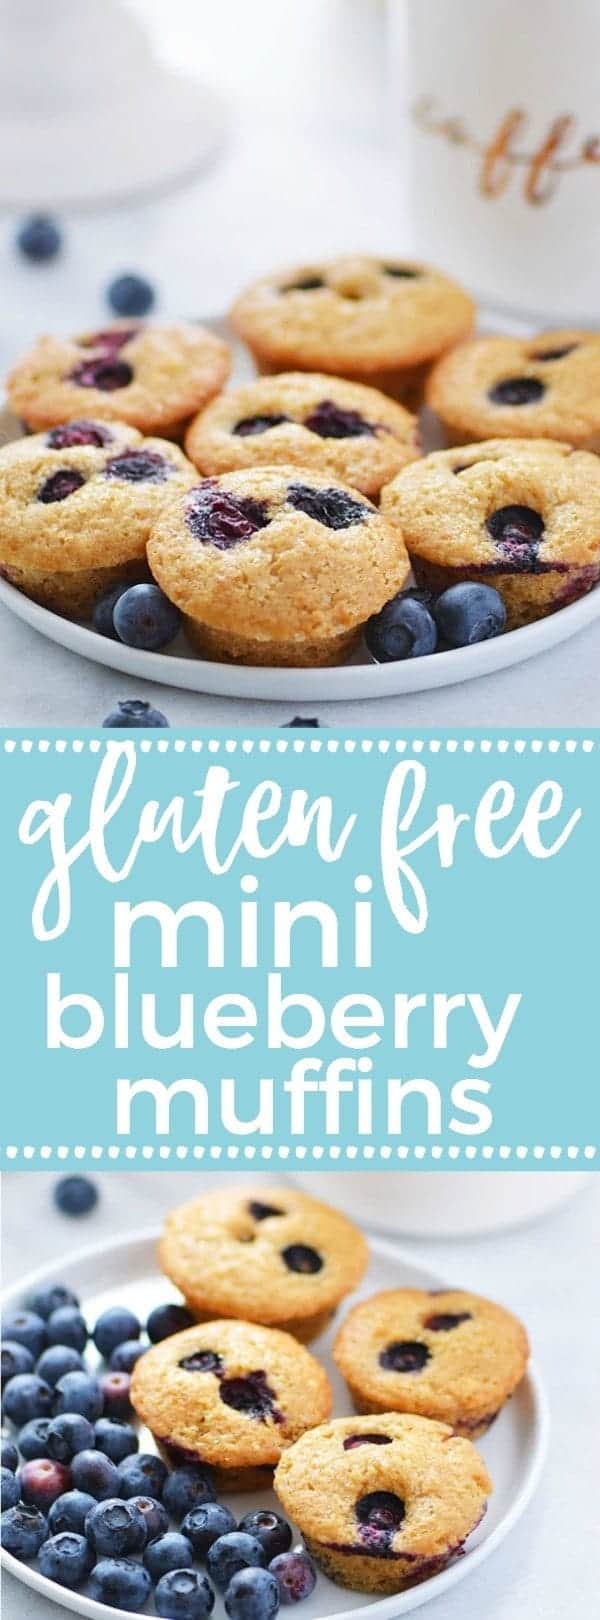 Quick and easy Gluten Free Mini Blueberry Muffins make a great grab-and-go breakfast or snack. Recipe from @whattheforkblog | whattheforkfoodblog.com | gluten free breakfast recipes | blueberry mini muffins | blueberry muffins recipe | muffin recipes | best blueberry muffins | homemade blueberry muffins | dairy free muffin recipes | gluten free muffins | 